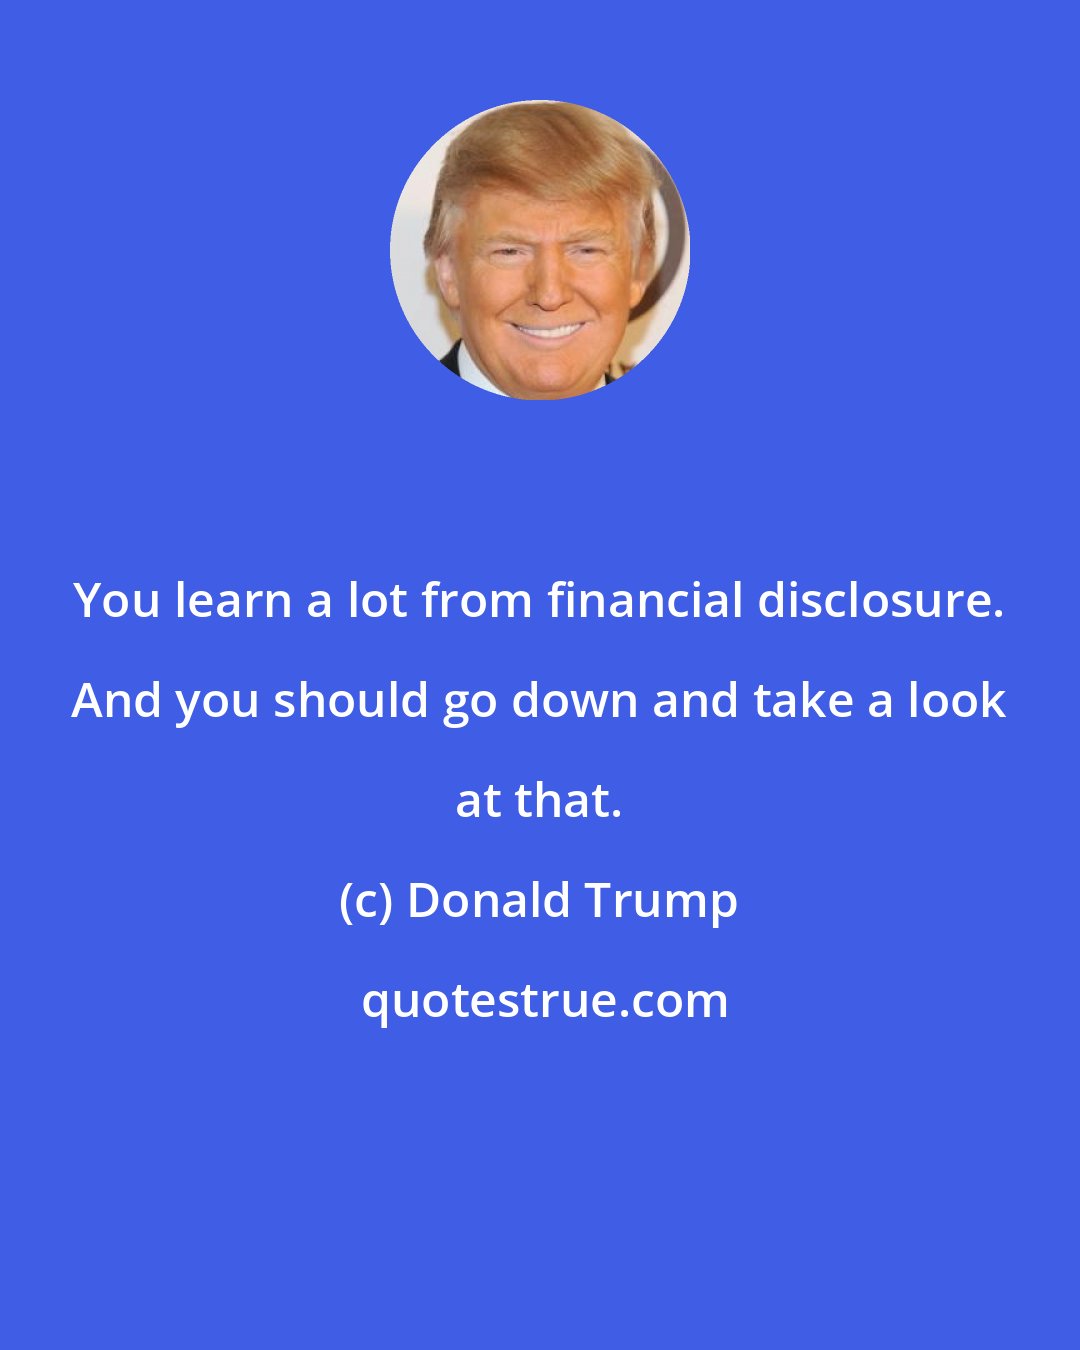 Donald Trump: You learn a lot from financial disclosure. And you should go down and take a look at that.